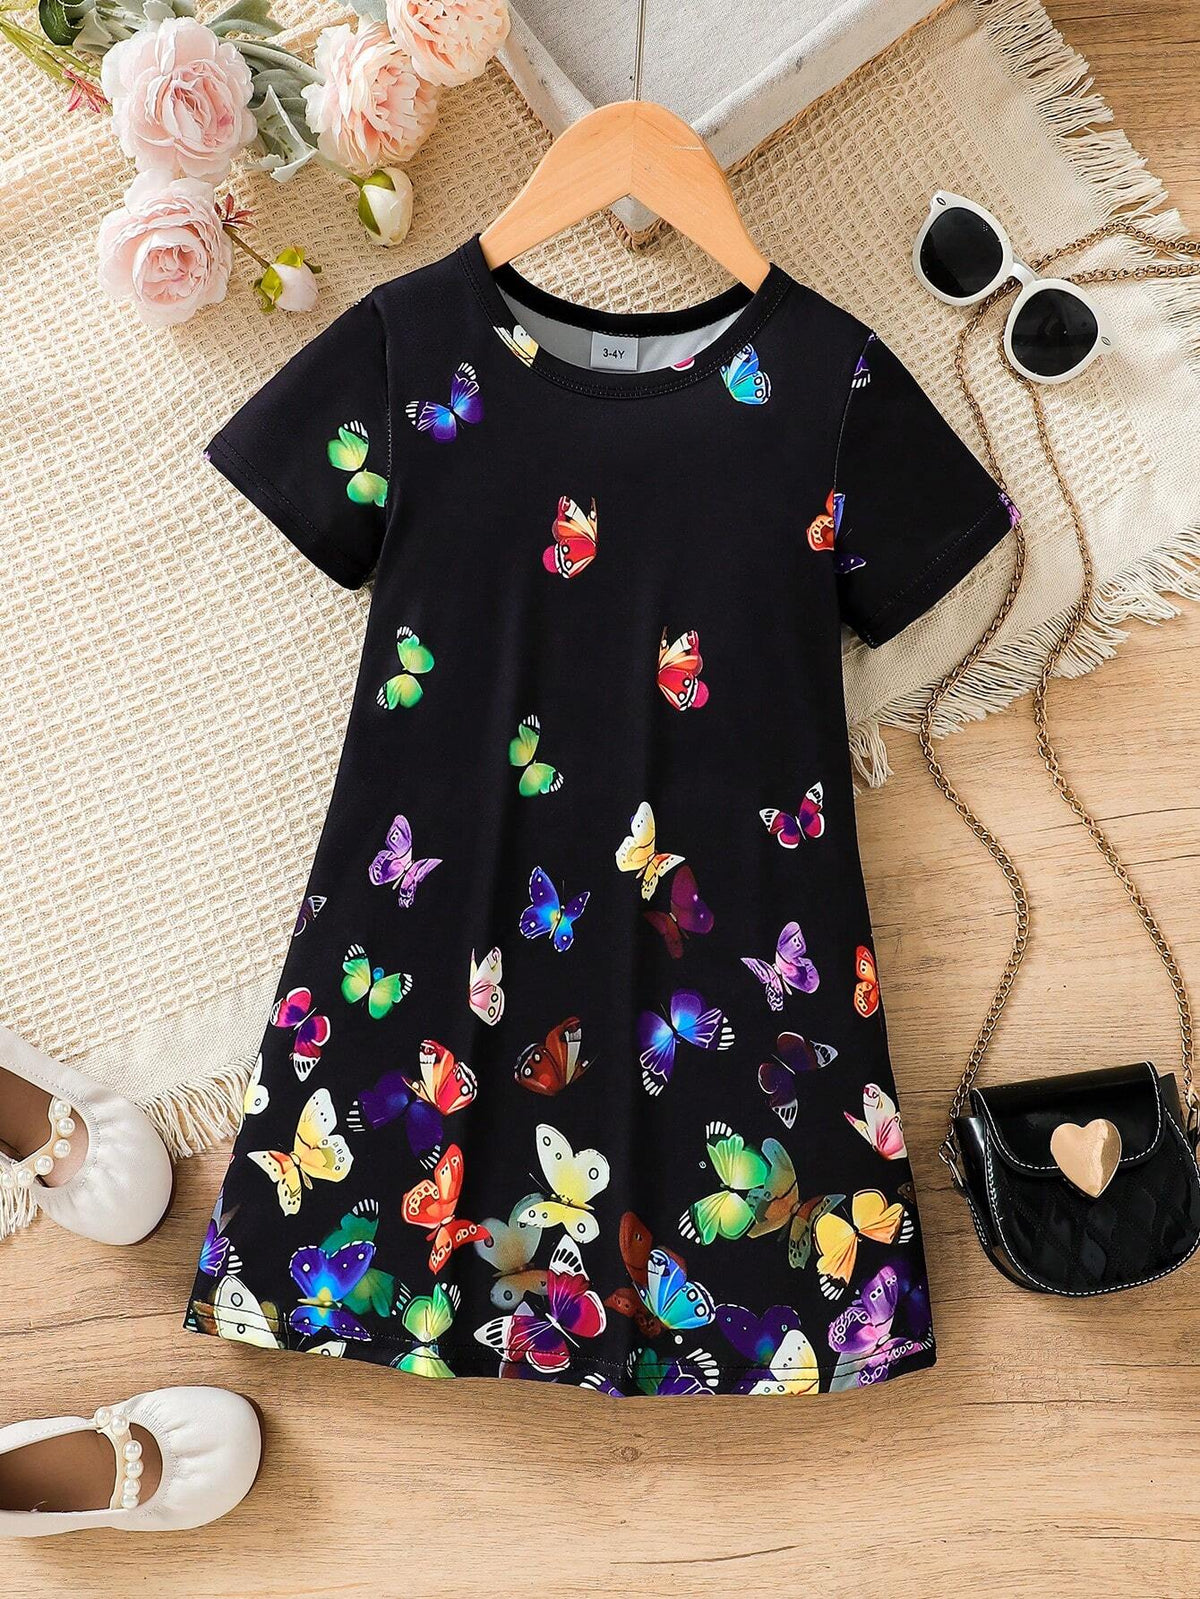 Young Girls" Summer Casual T-Shirt Dress With Butterfly Prints And Short Sleeves